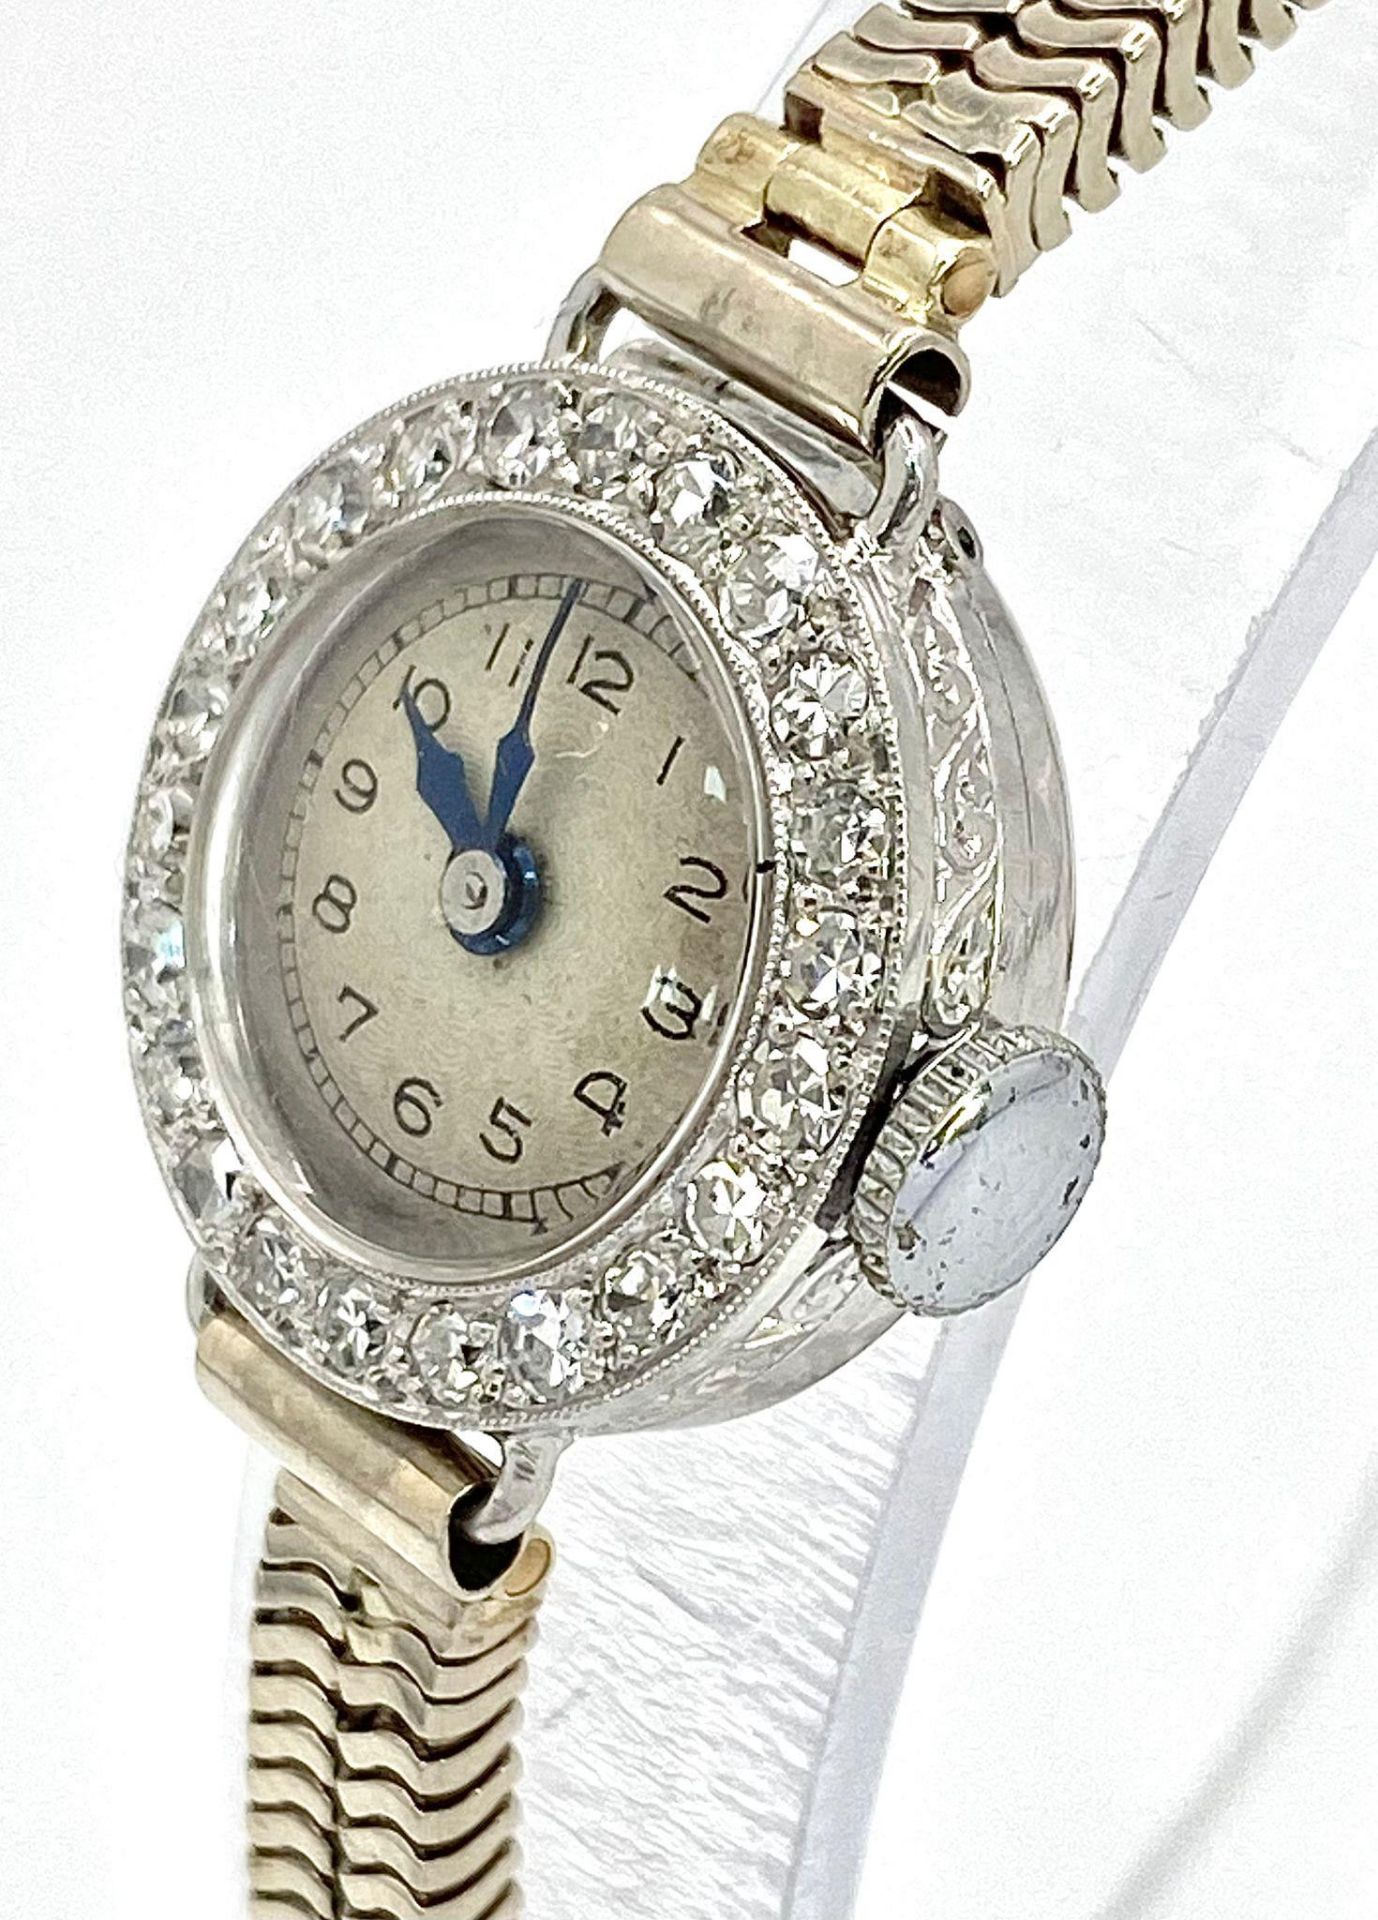 A ladies, platinum watch with diamond bezel and a 9 K white gold double snake chain bracelet. The - Image 4 of 6